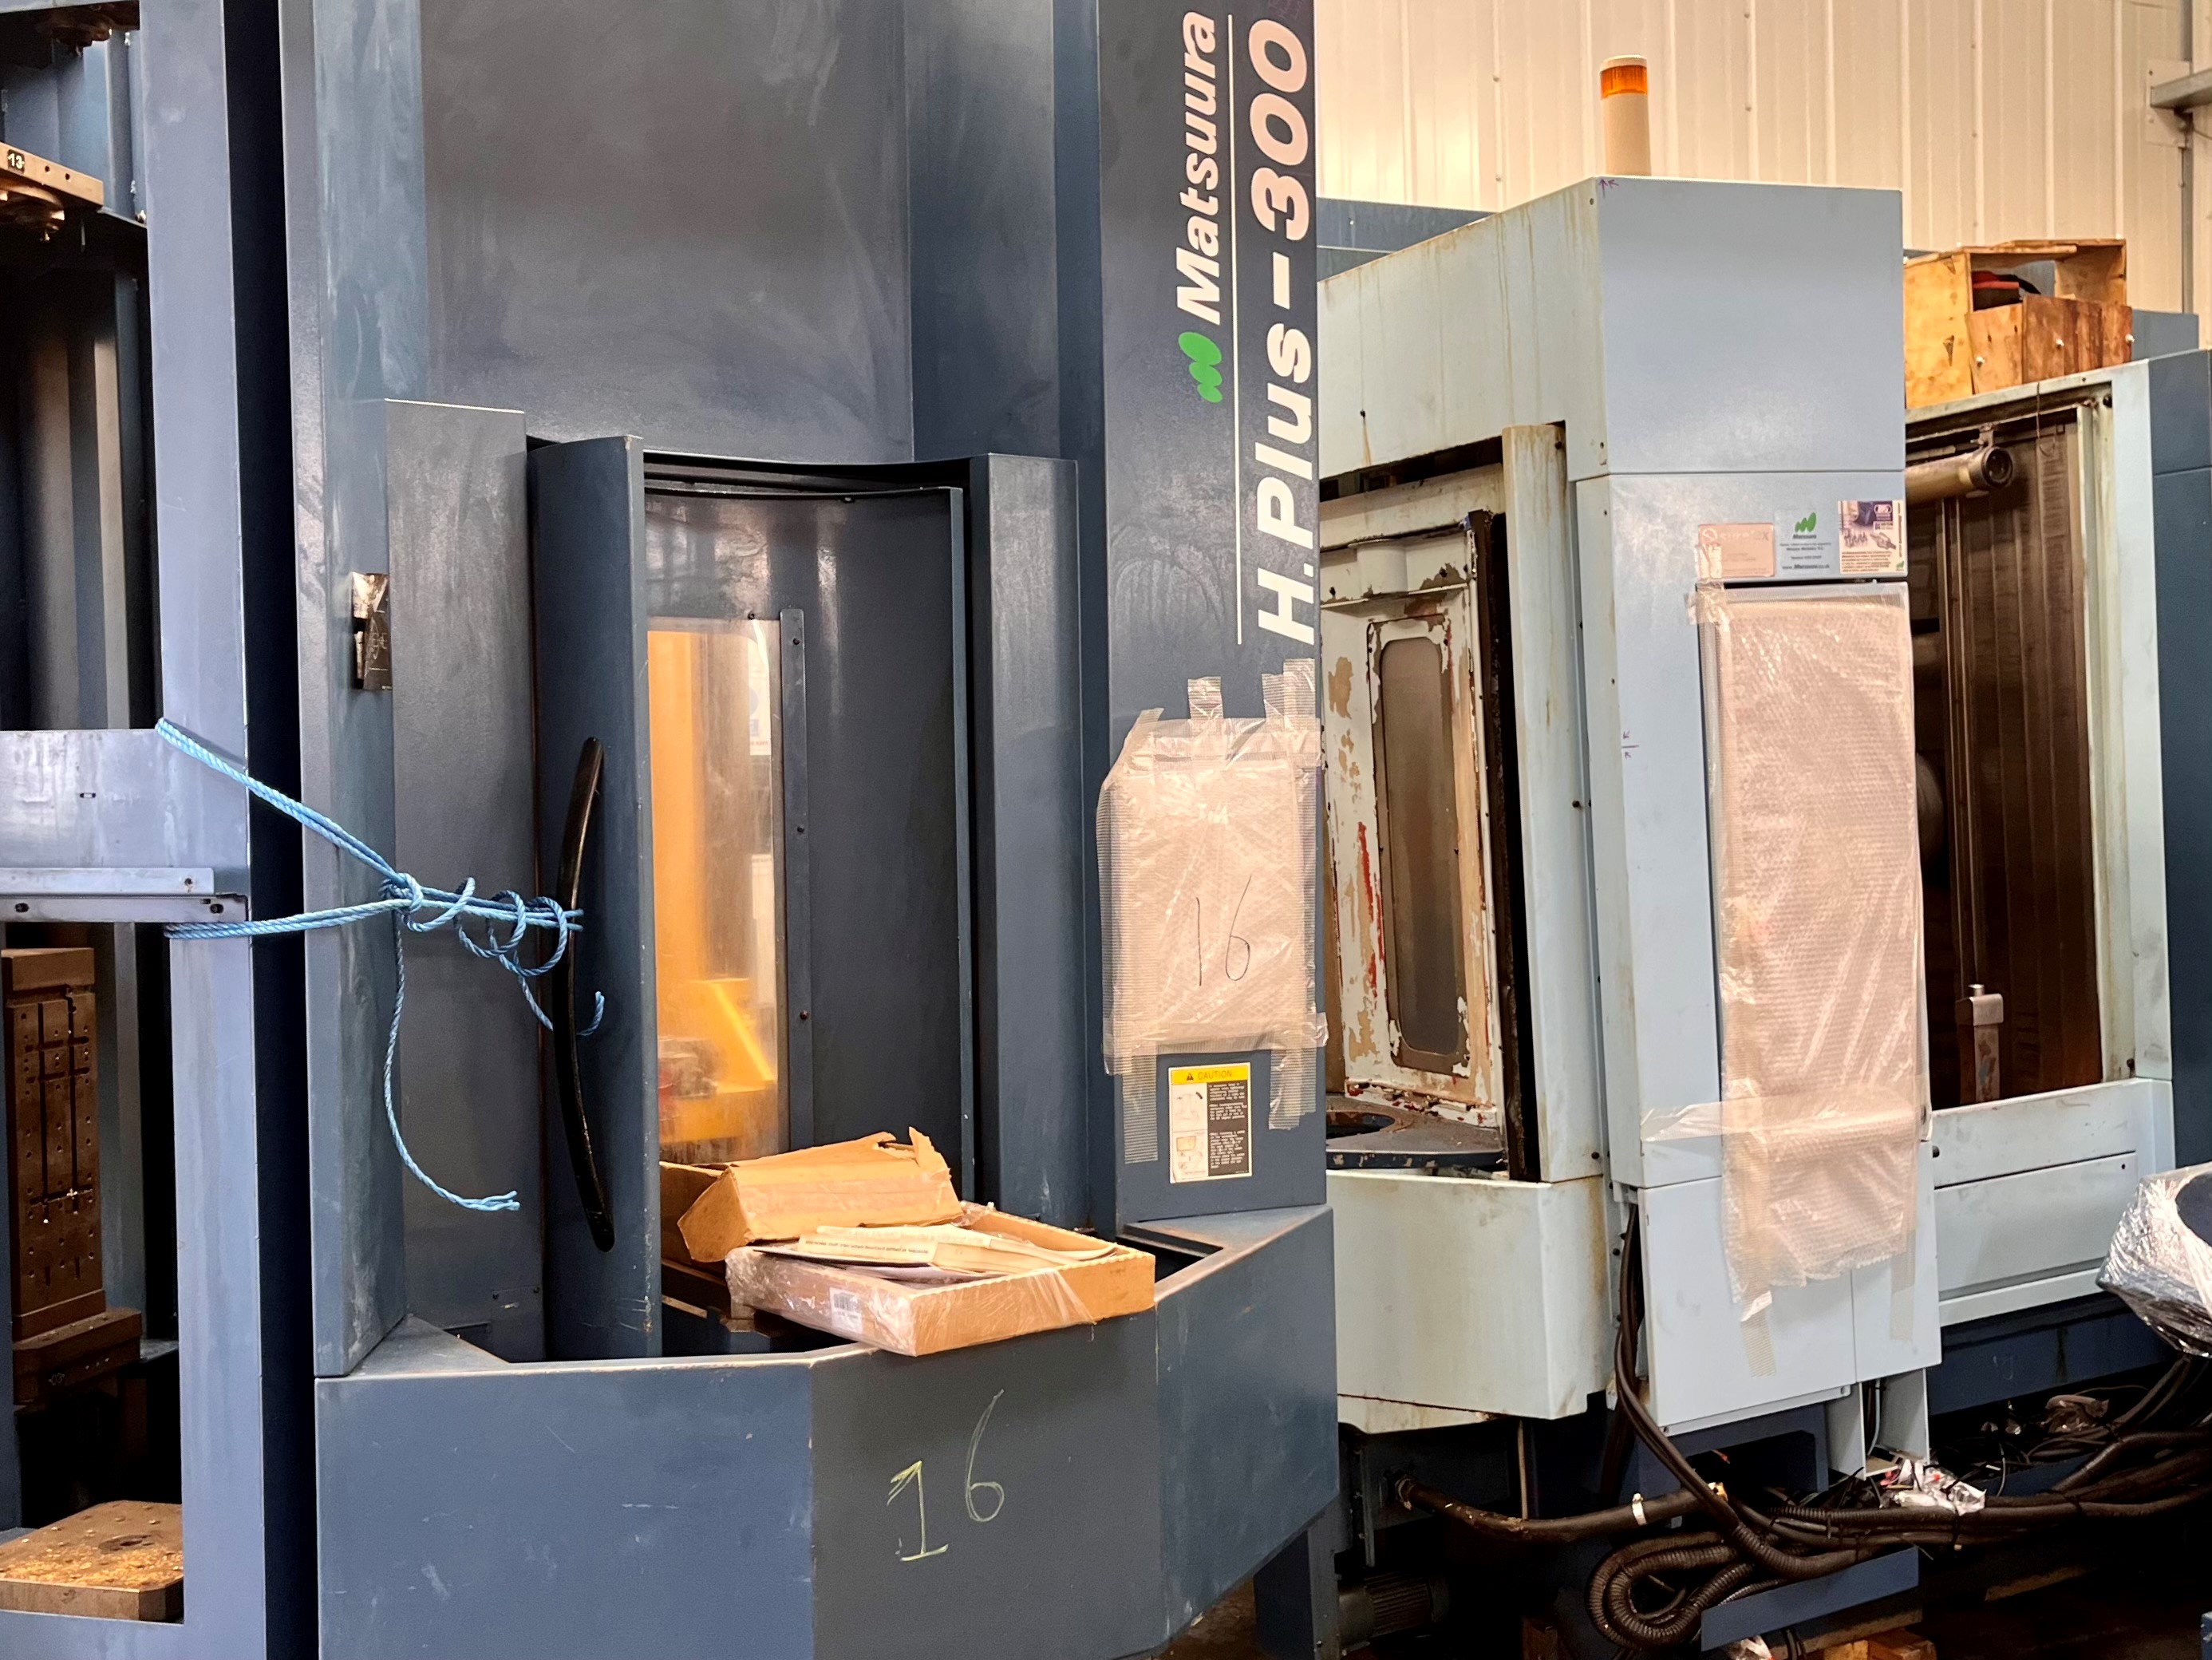 Further investment in new Matsuura